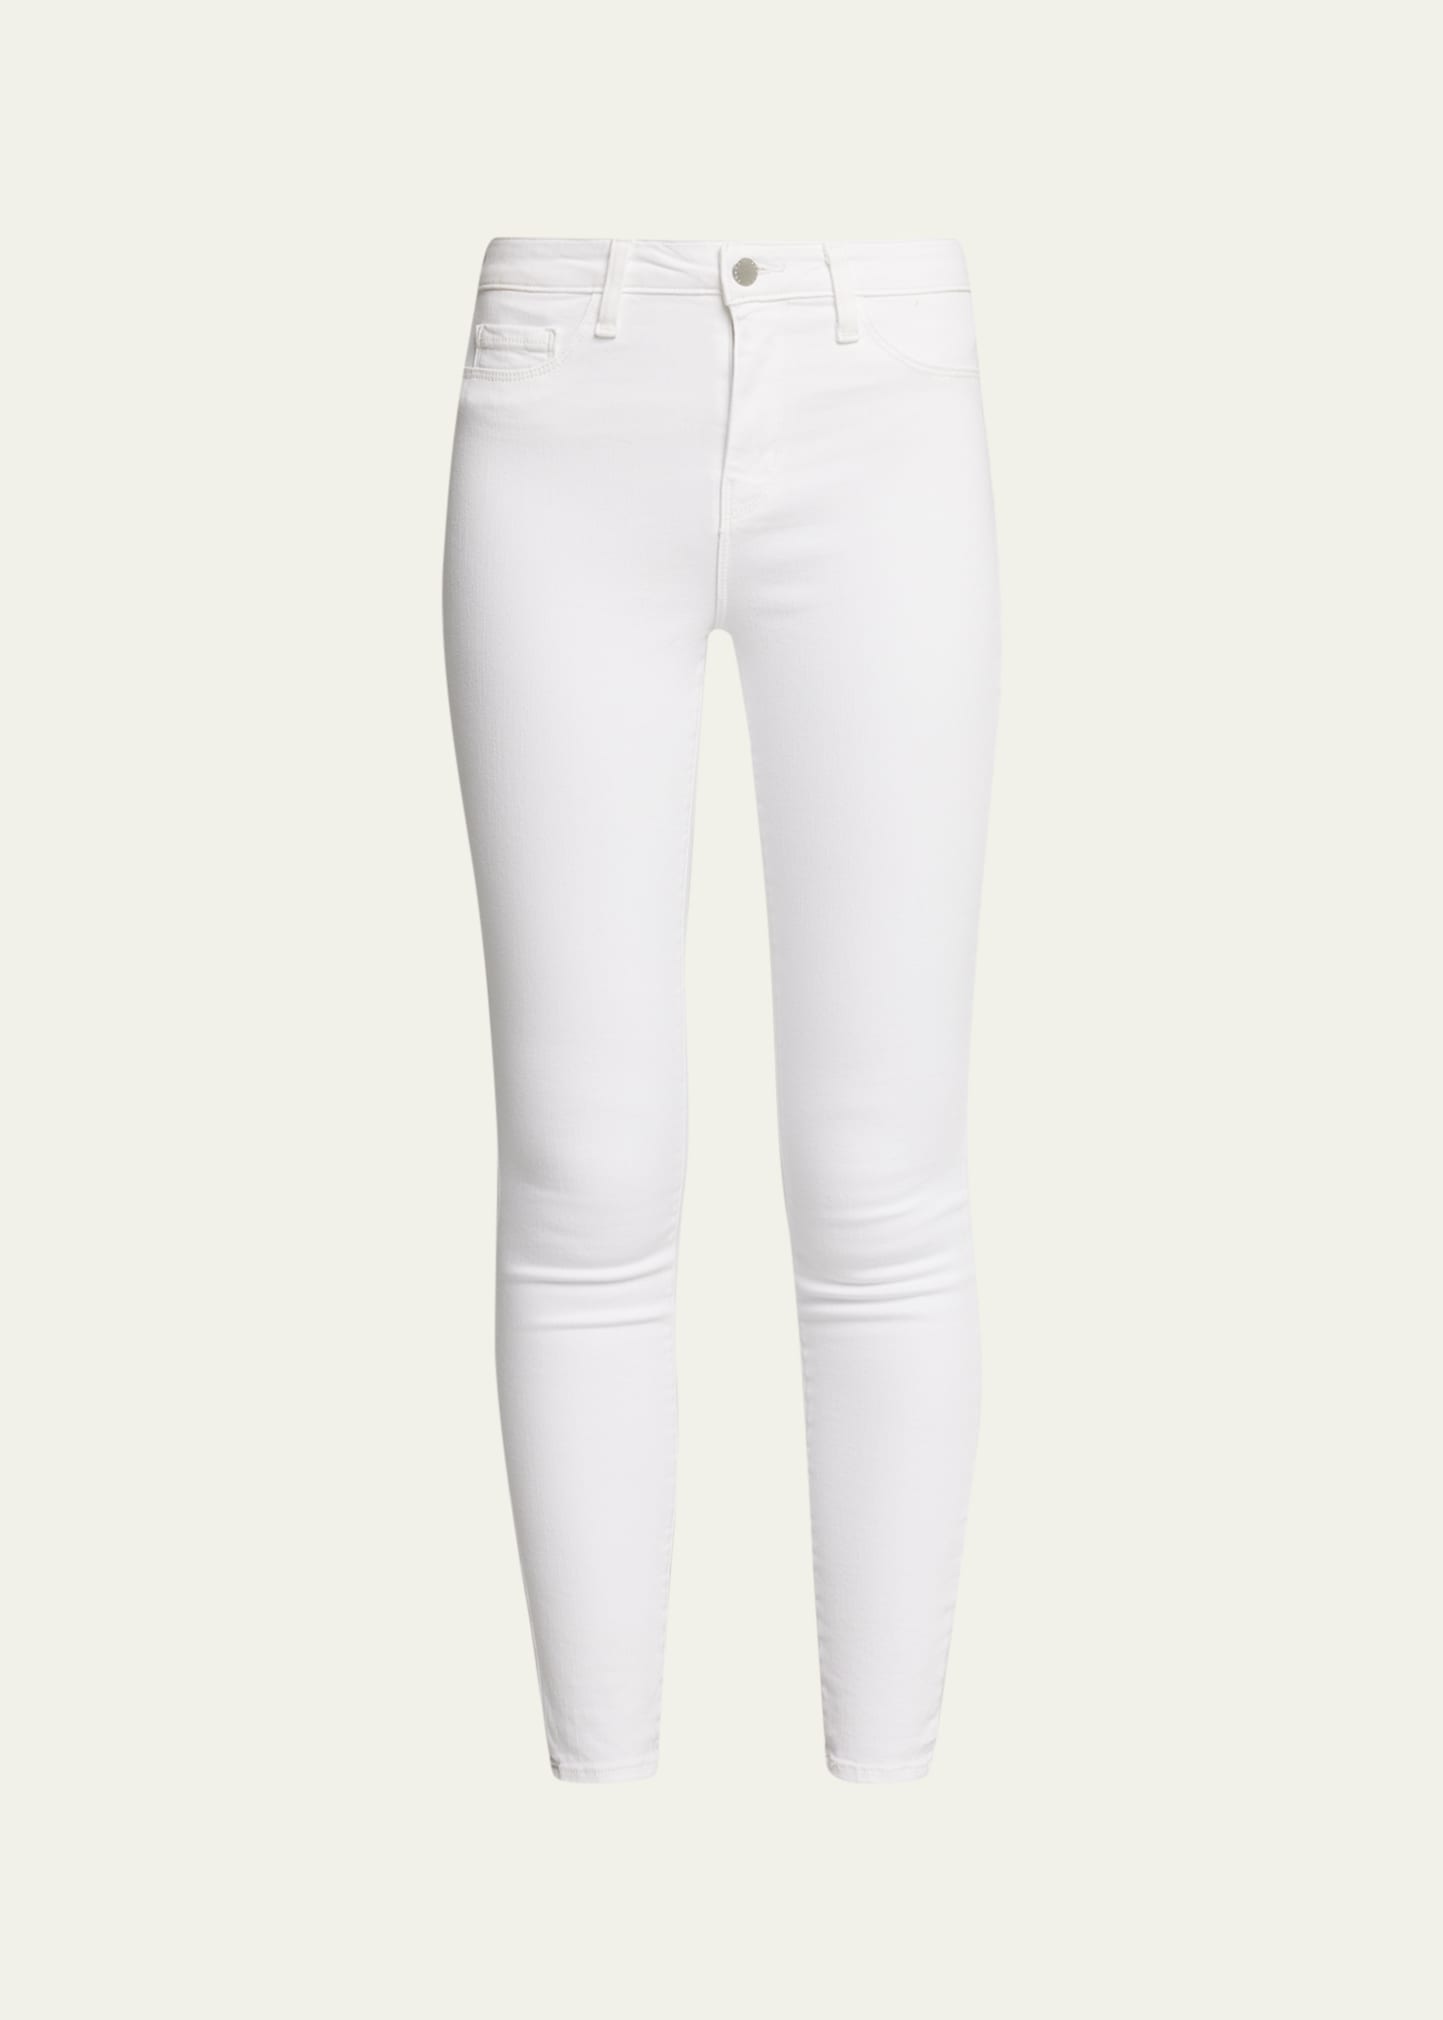 L'Agence Marguerite High-Rise Skinny Jeans